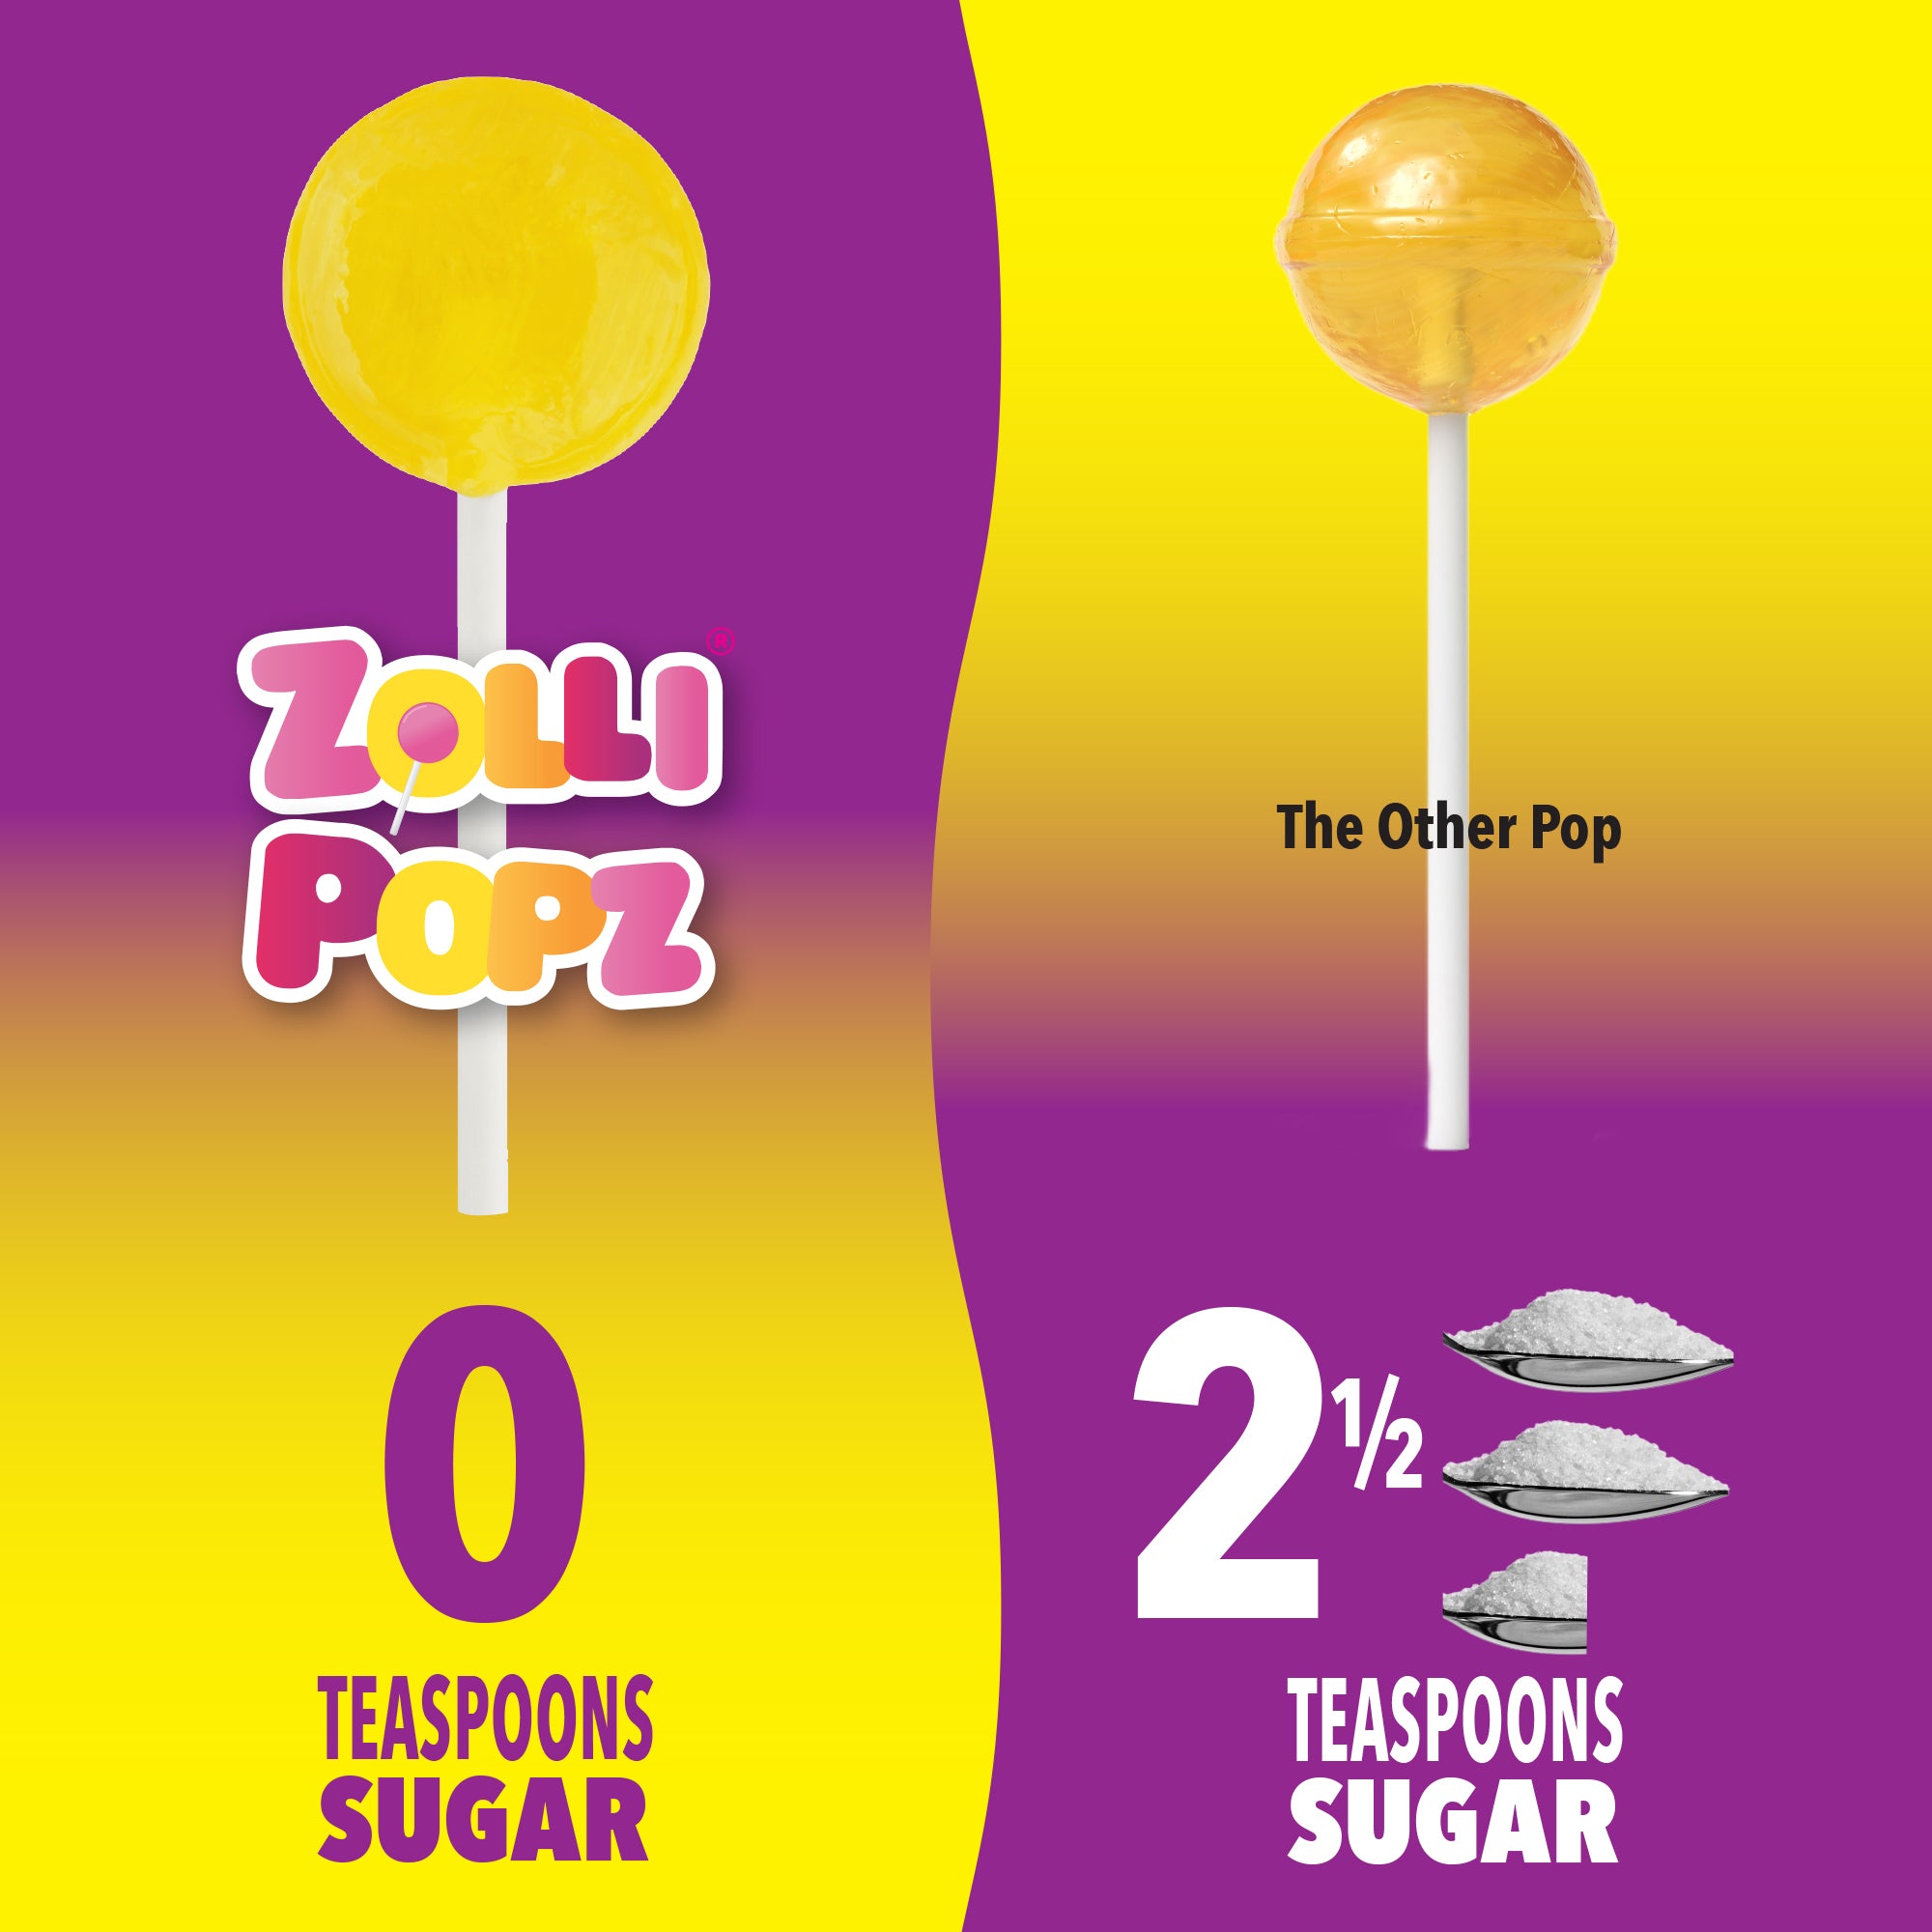 Zollipops have 0 teaspoons of sugar. Competing lollipops have 2.5 teaspoons of sugar.